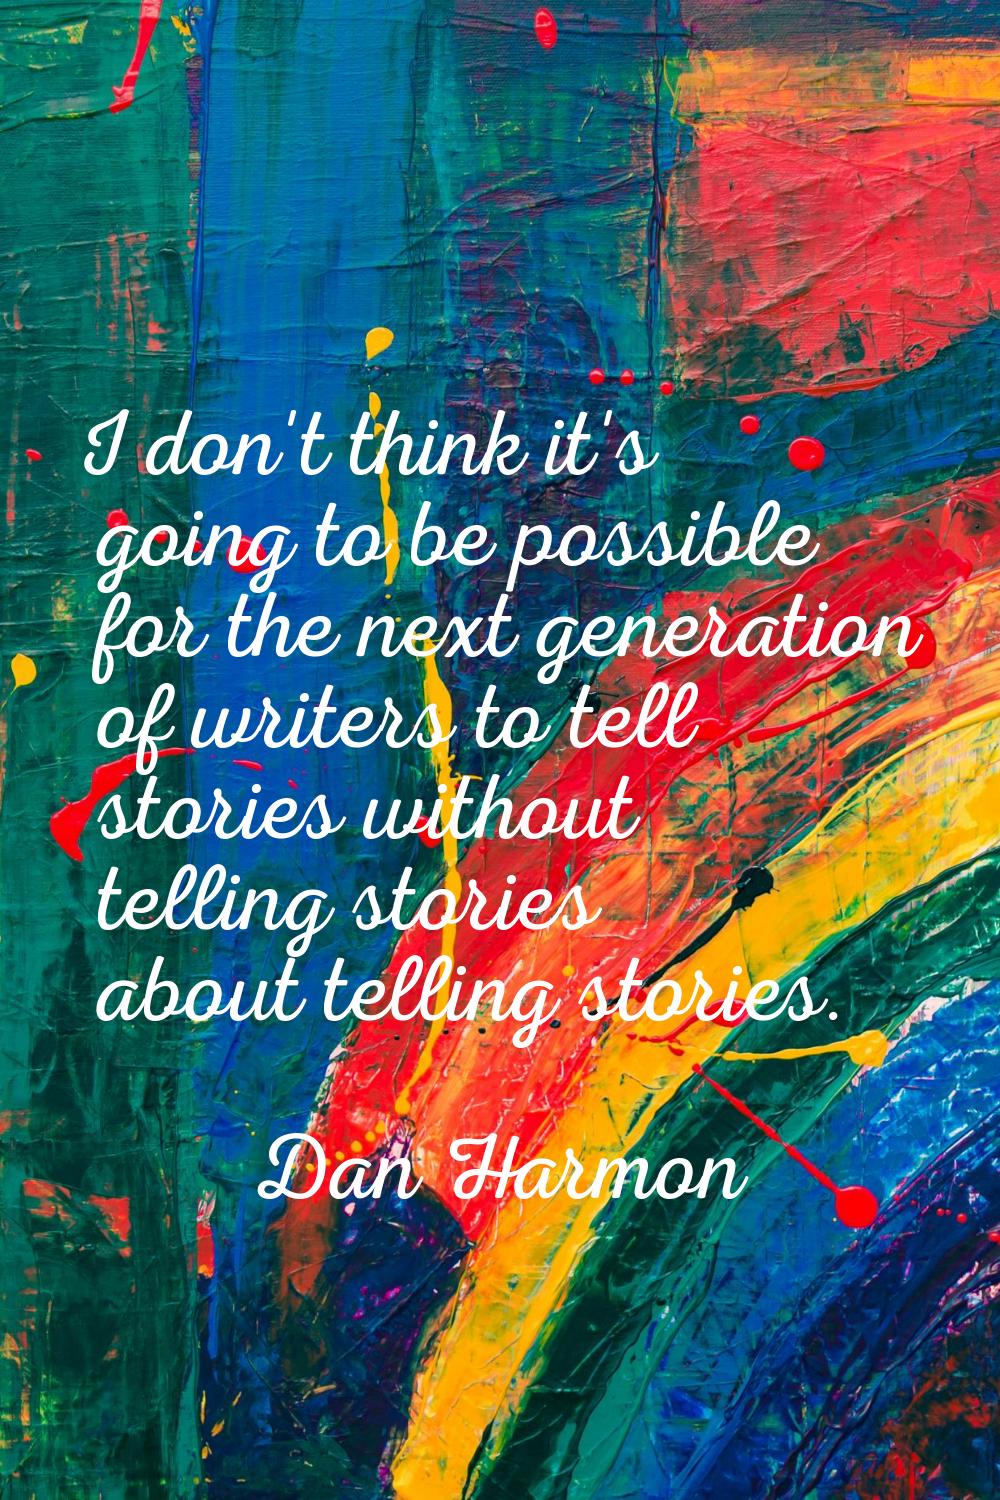 I don't think it's going to be possible for the next generation of writers to tell stories without 